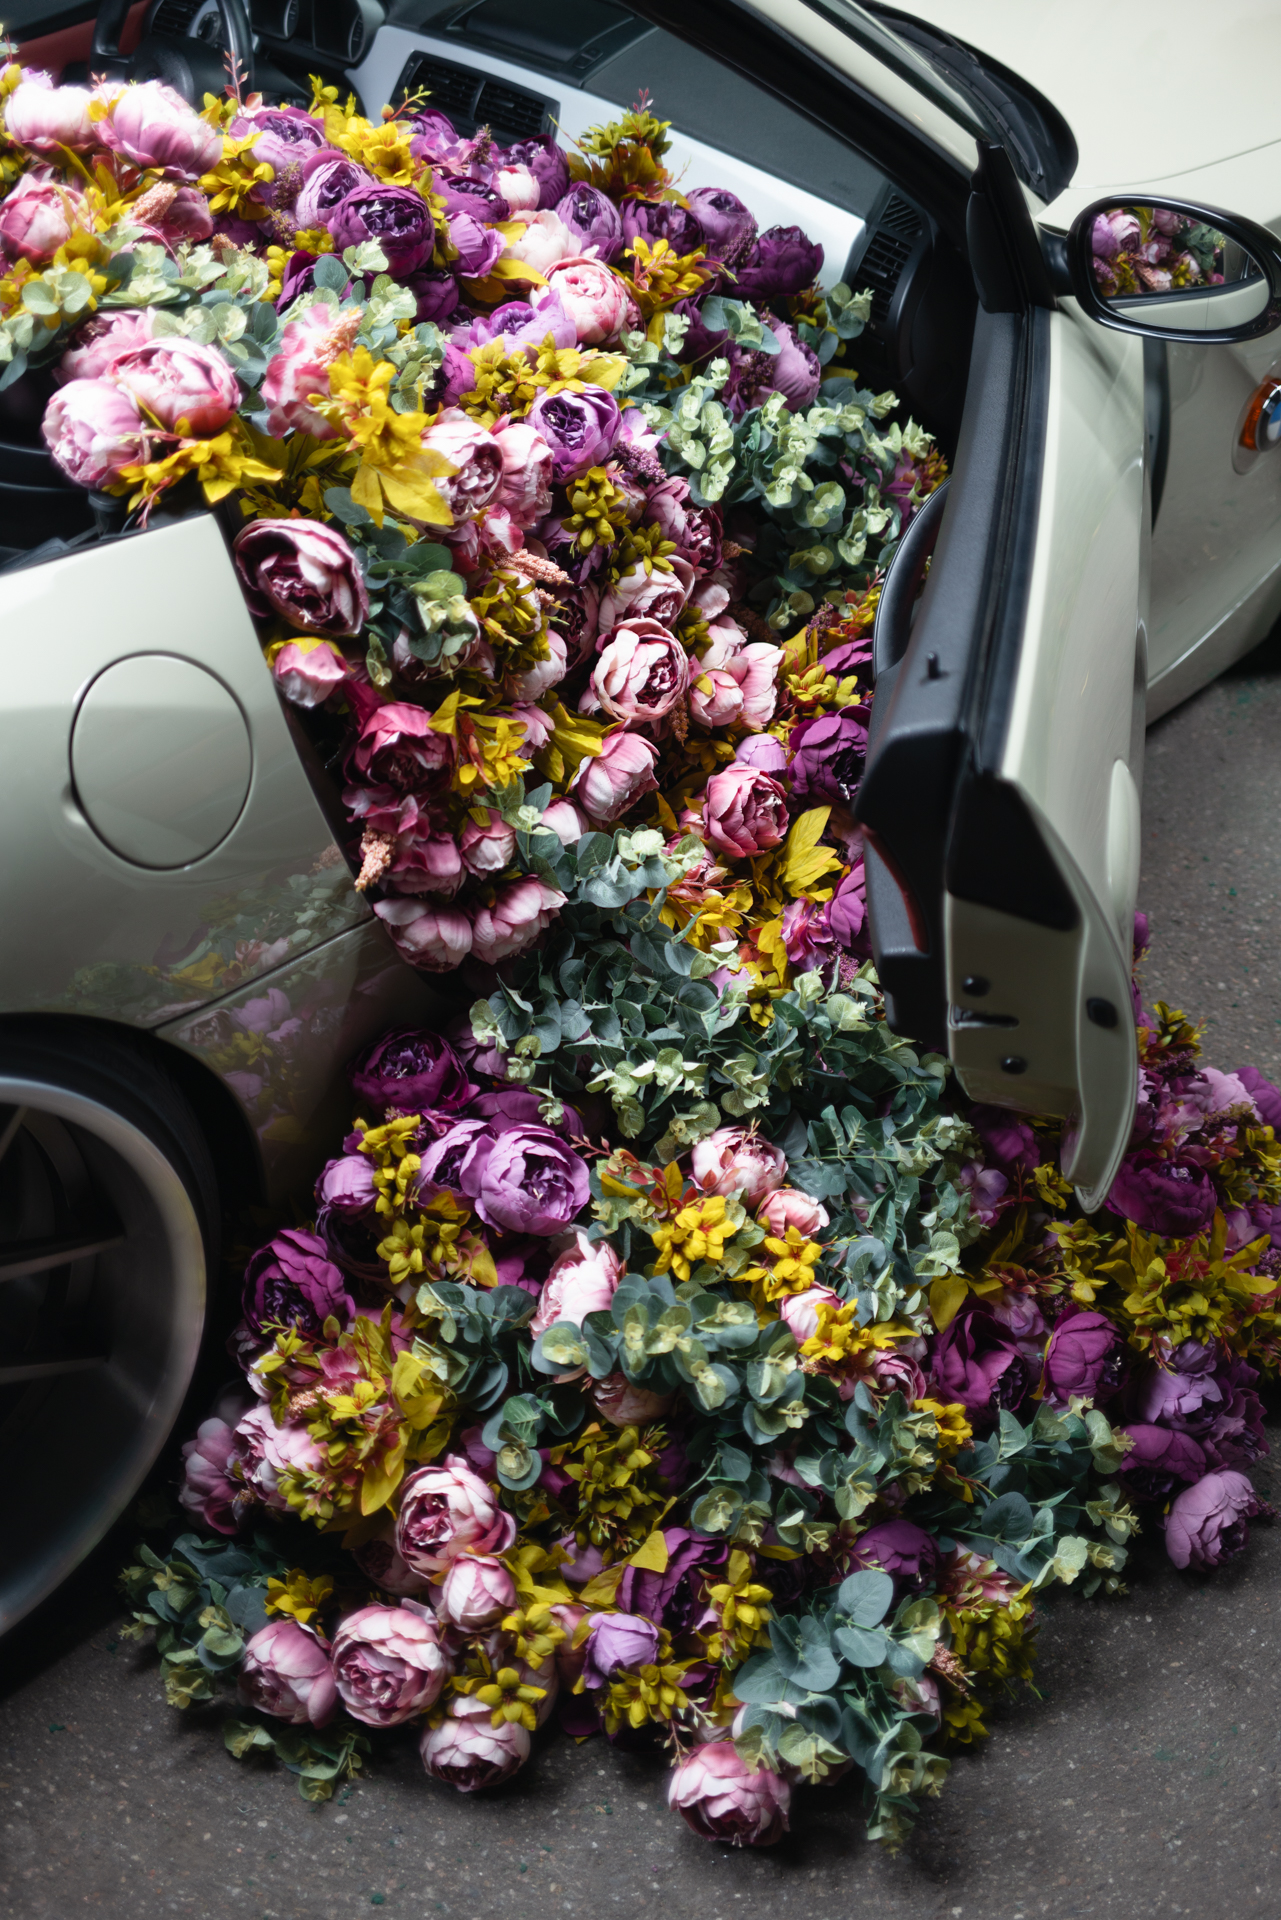 Flowers in the car 